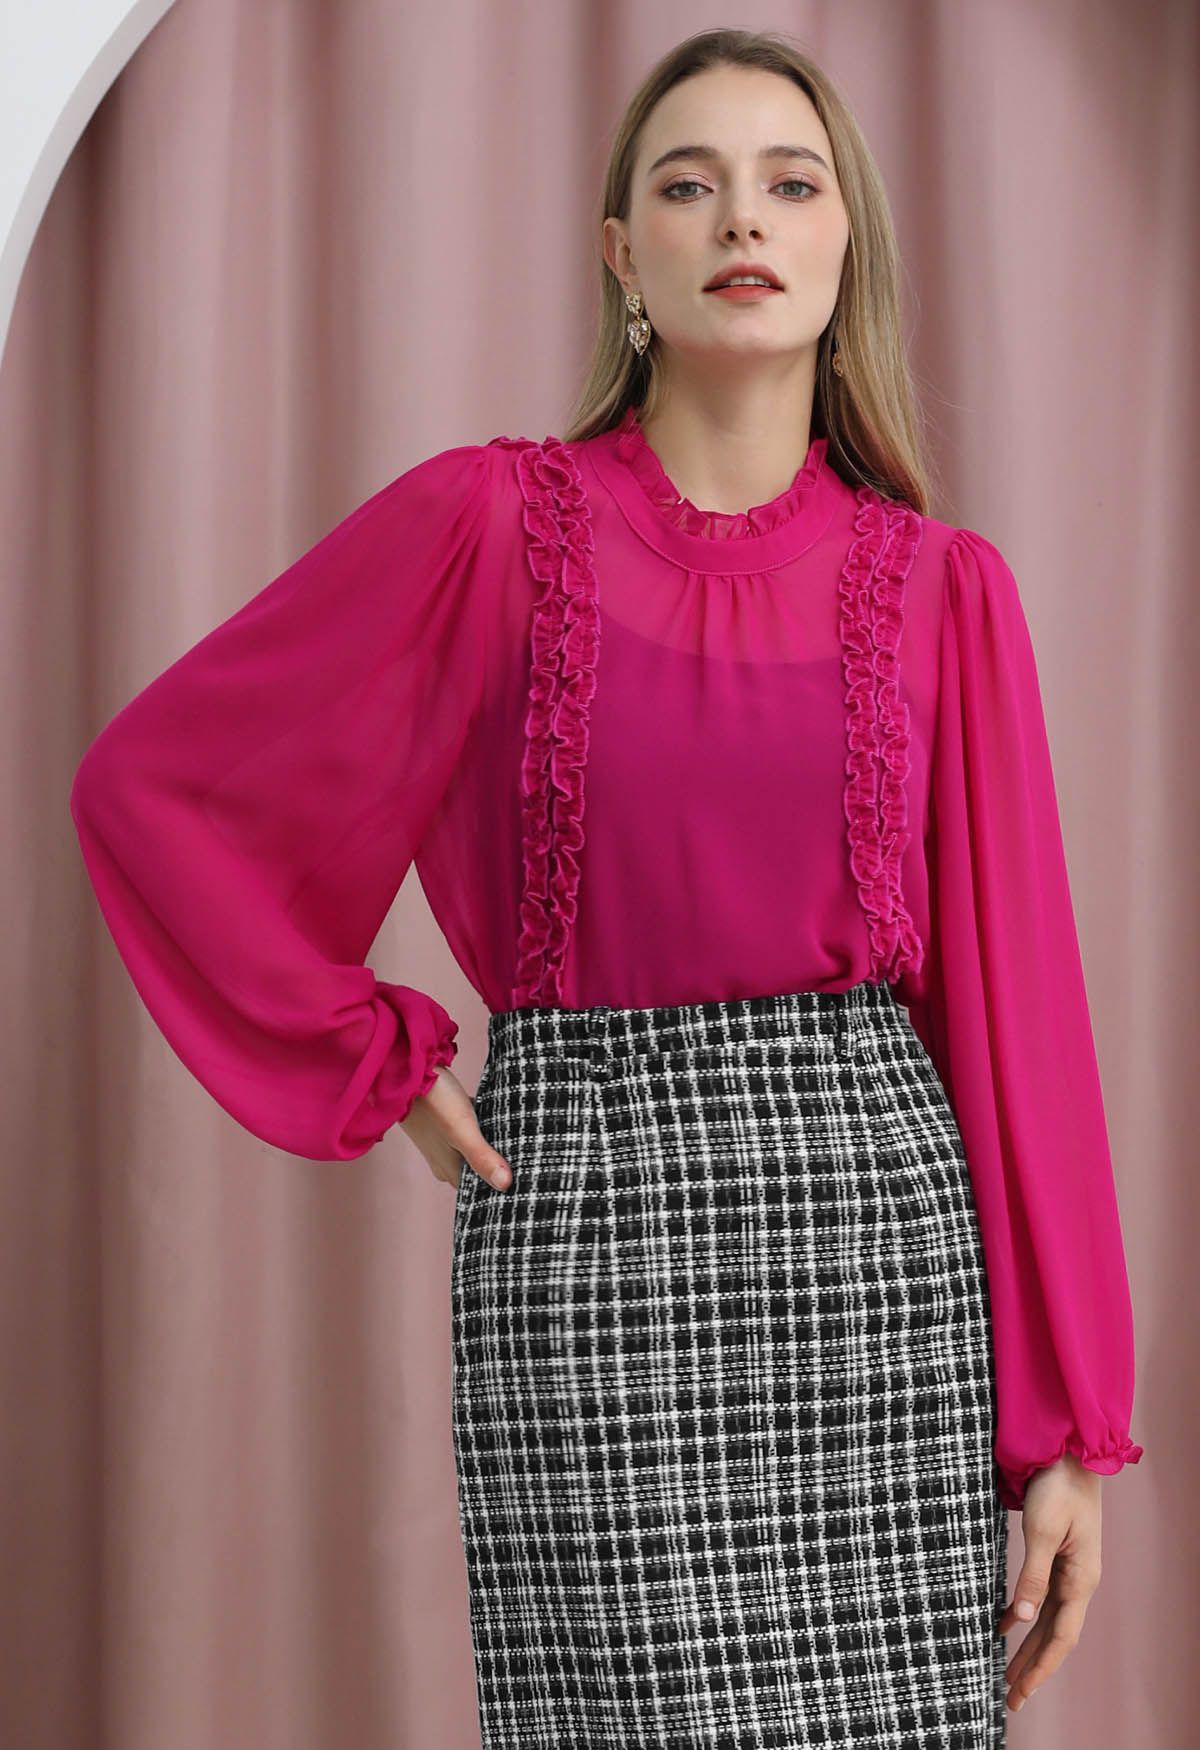 Ruffle Adorned Bubble Sleeves Chiffon Top in Hot Pink